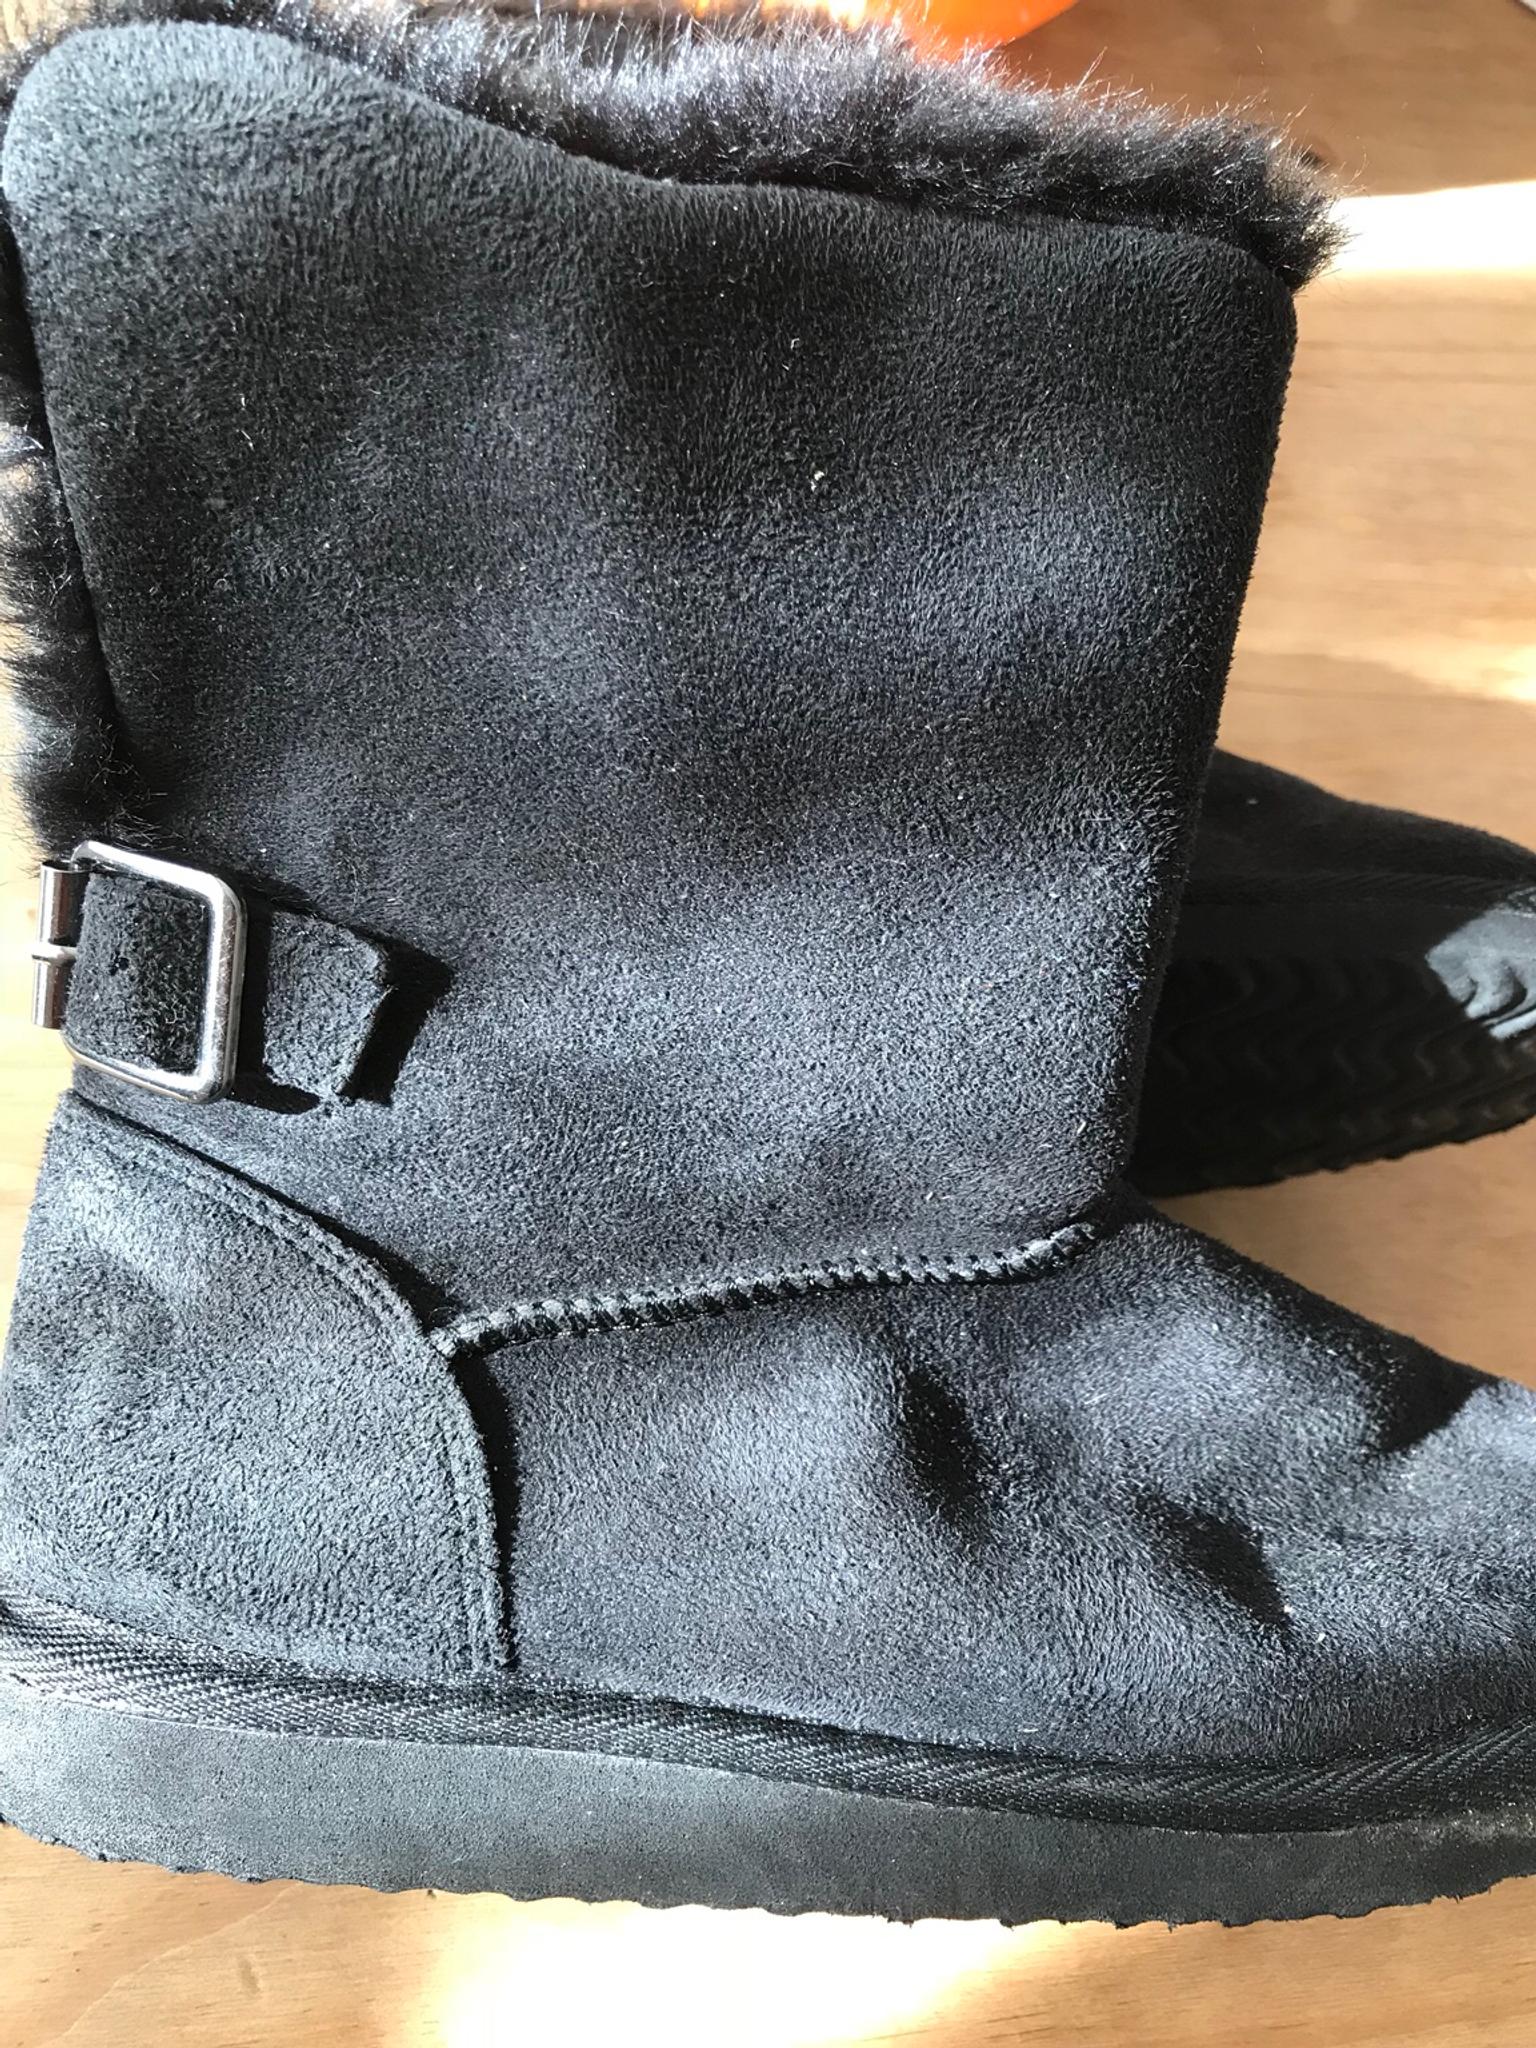 girls ugg boots size 2